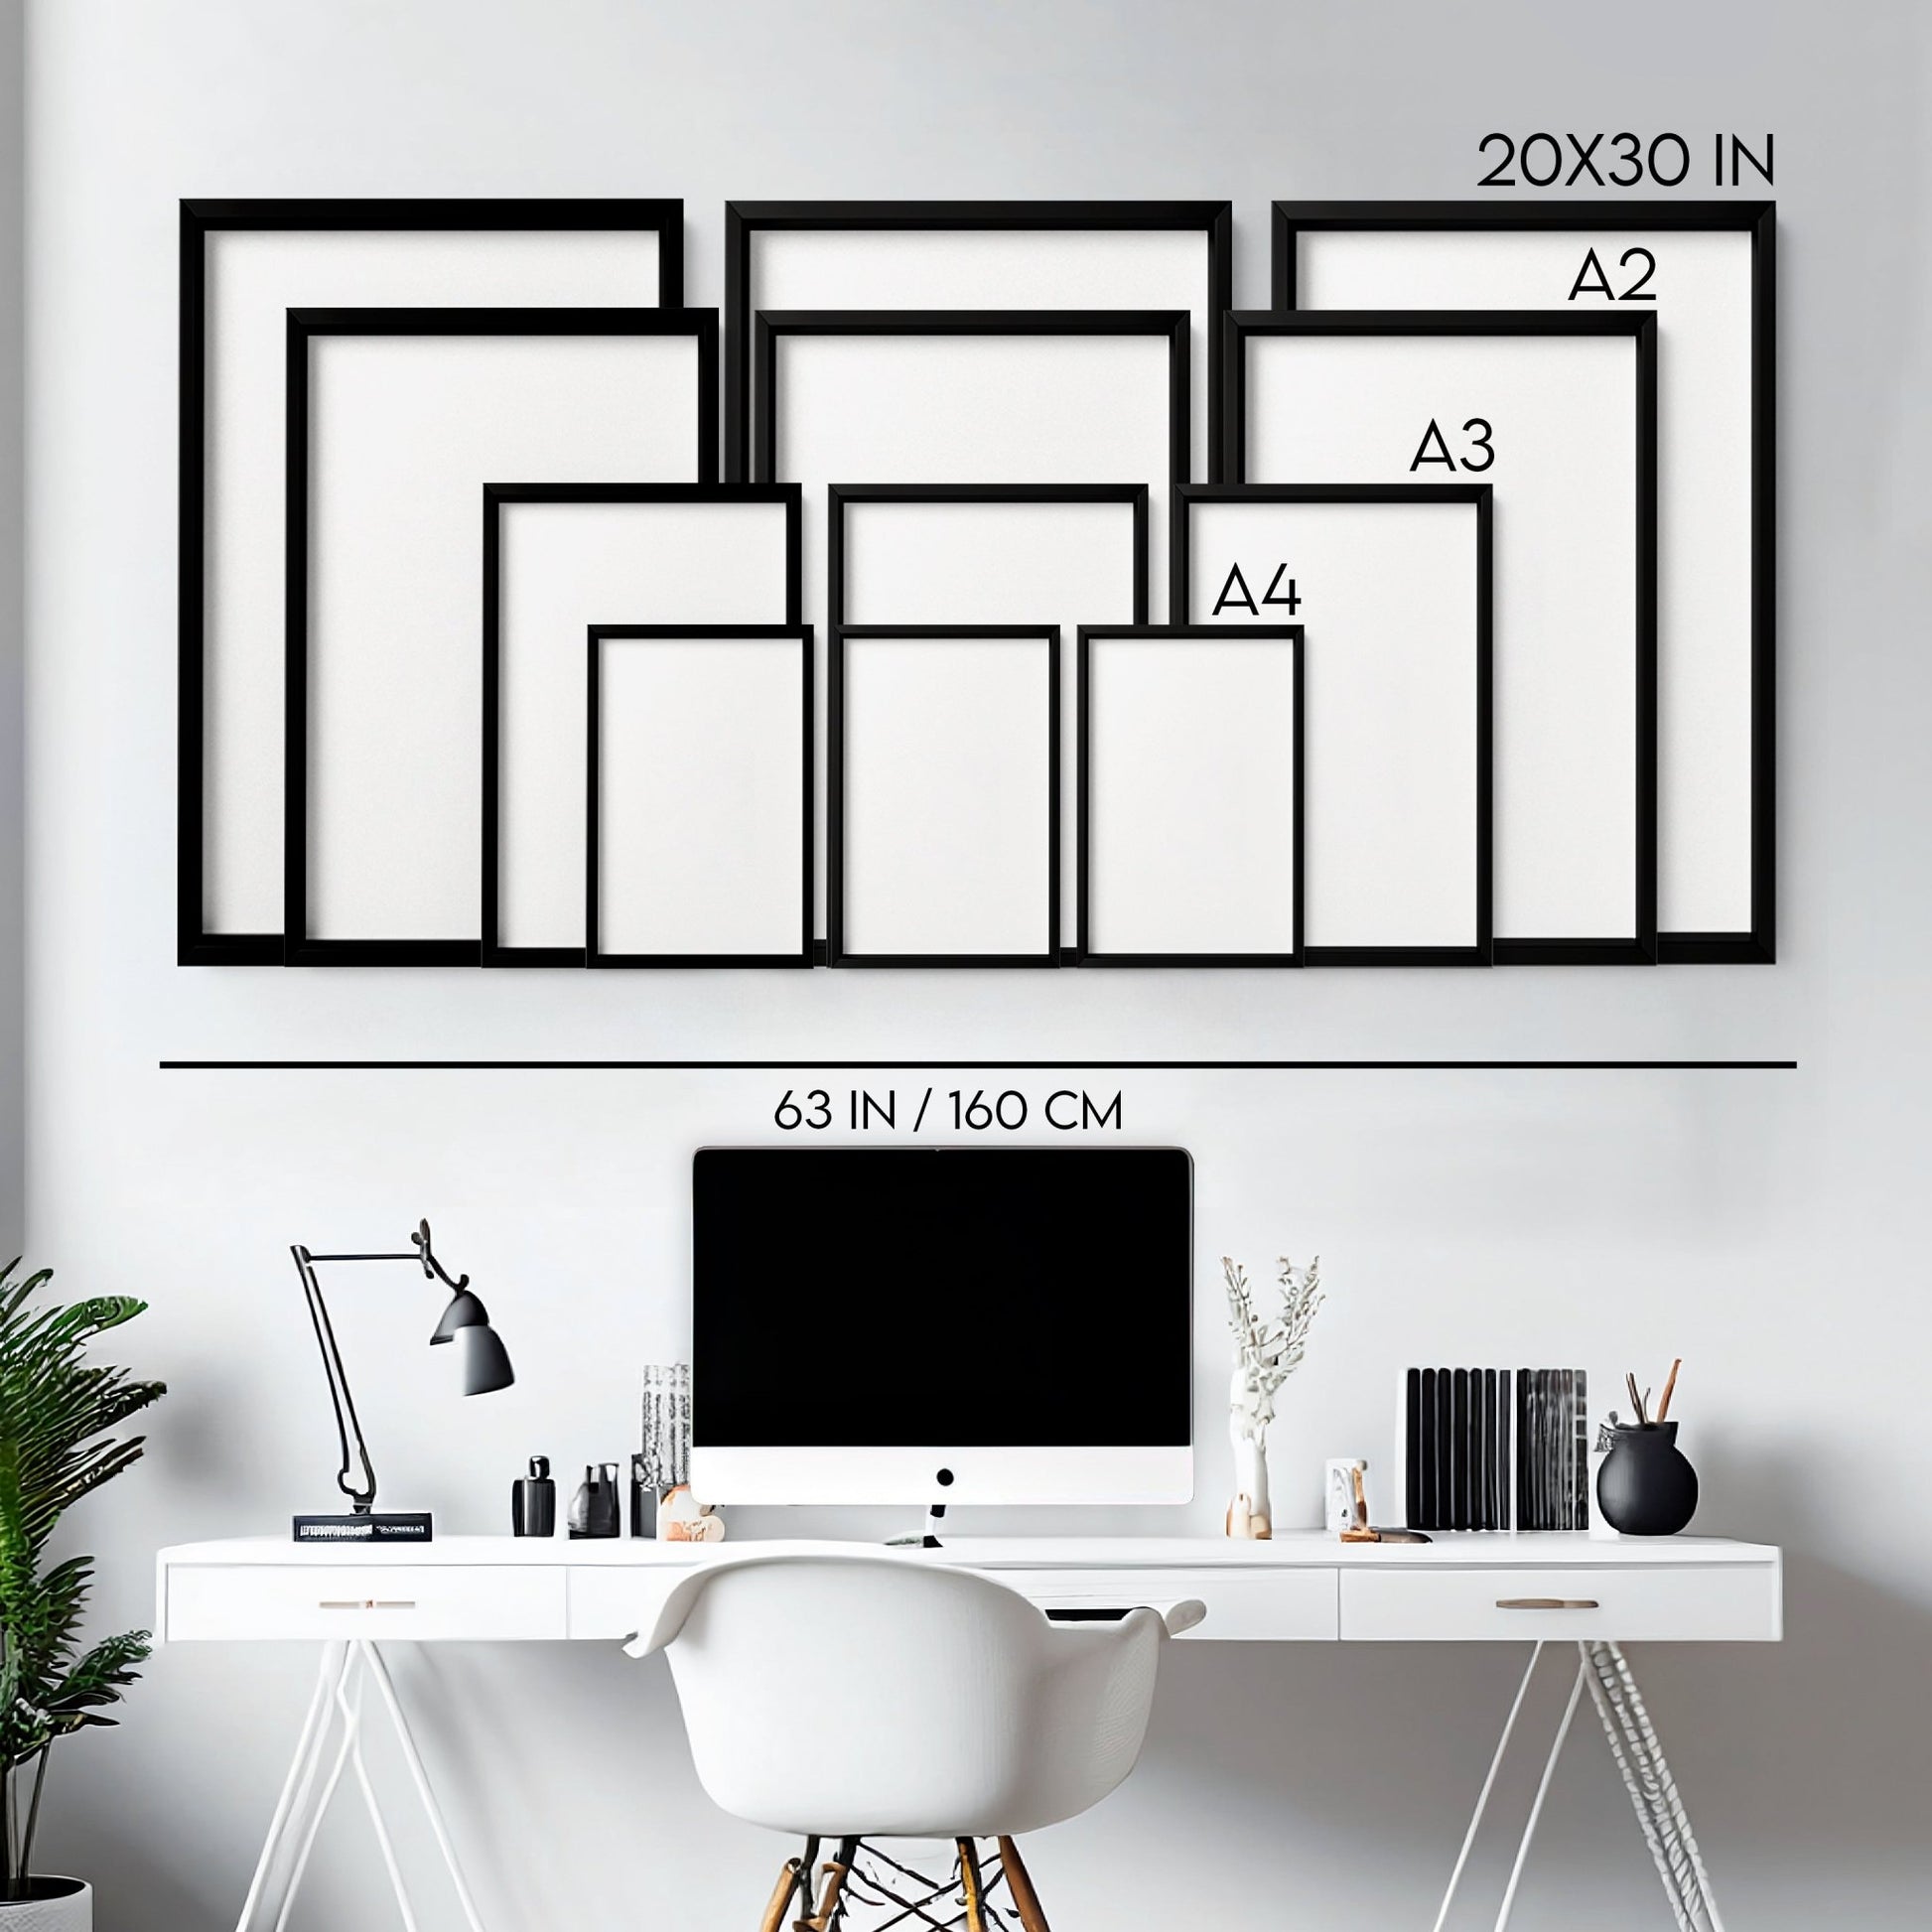 Zen room decor | set of 2 wall art prints for office - About Wall Art